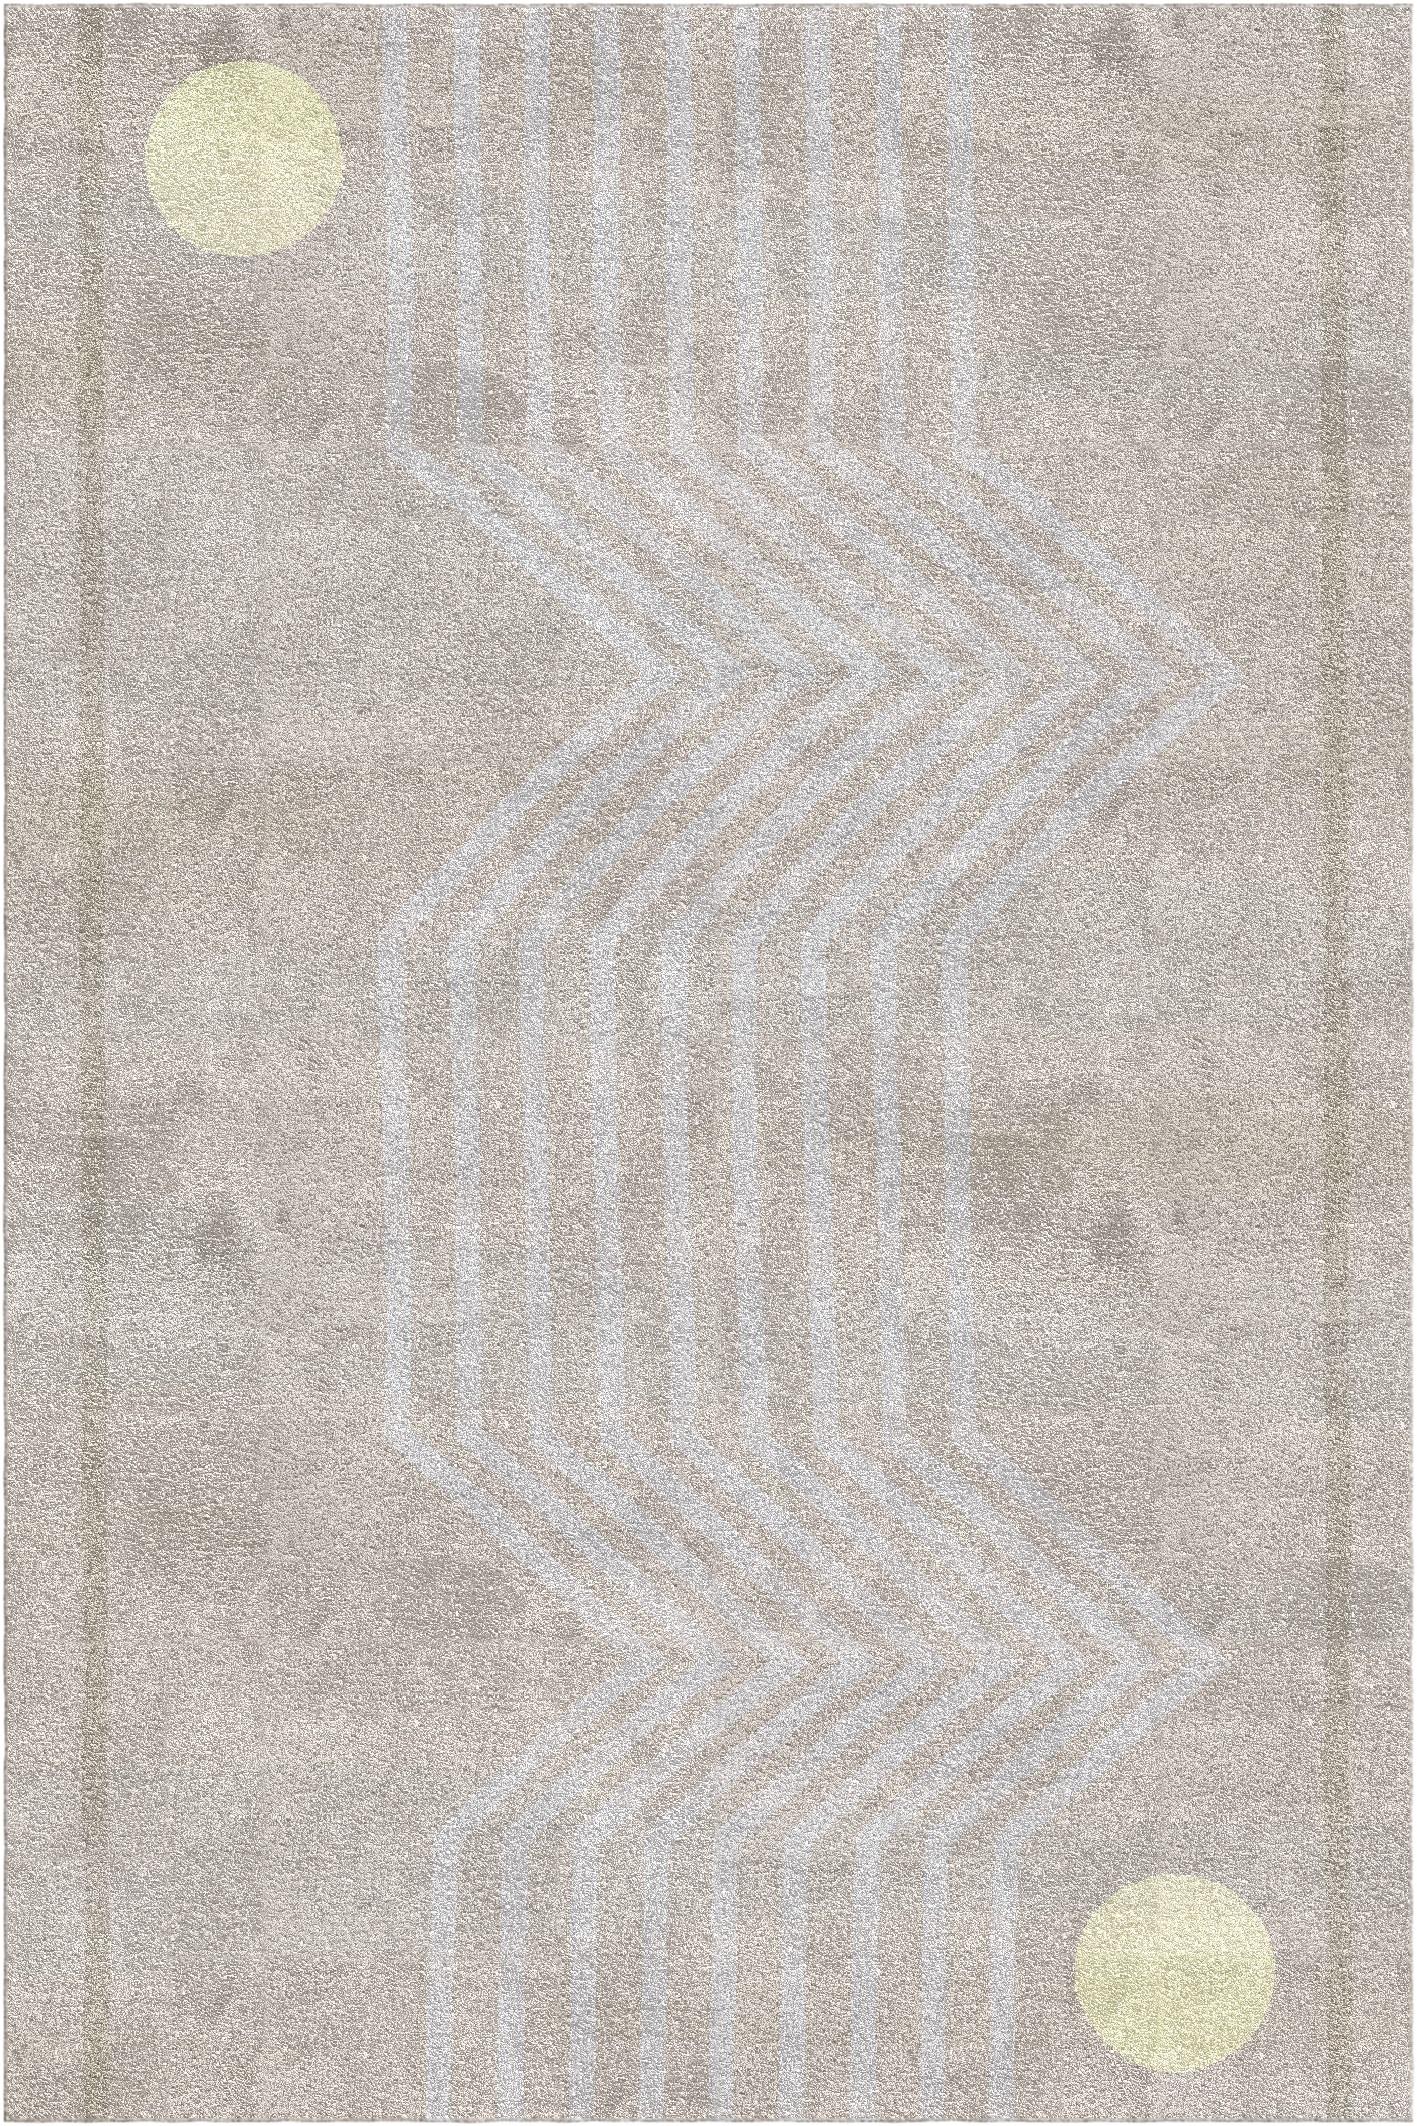 Futuro rug II by Vanessa Ordoñez.
Dimensions: D 300 x W 200 x H 1.5 cm.
Materials: bamboo fibers and linen.

A striking design by Vanessa Ordoñez, this gorgeous rug will add sophistication and allure in any contemporary home. Hand-tufted in